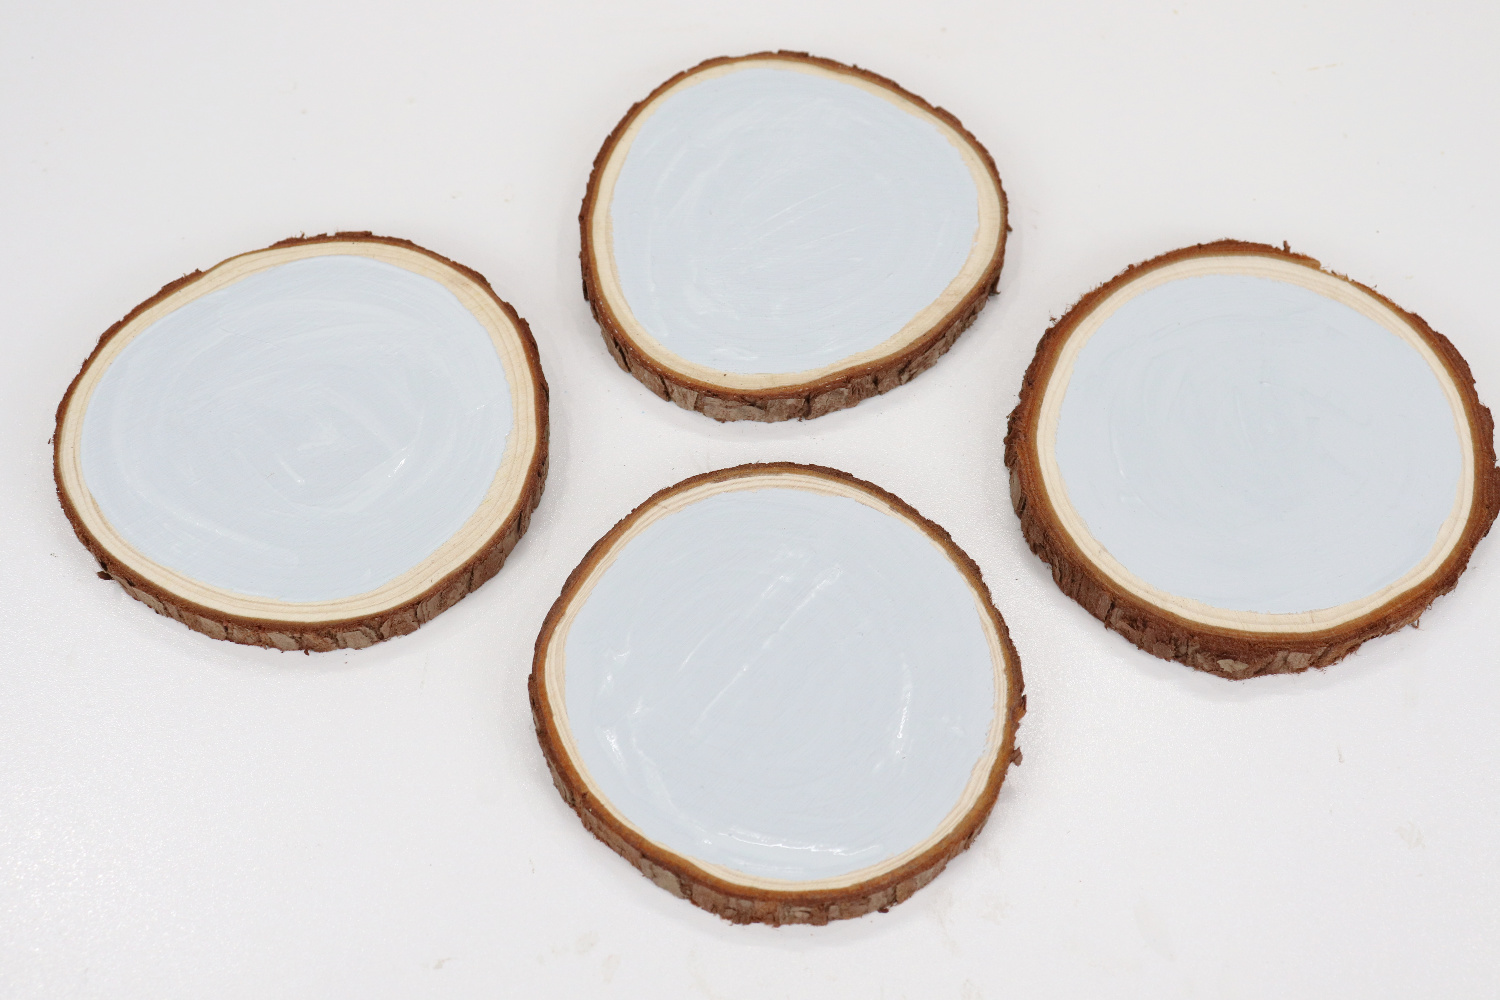 Image contains four small wood slices painted with a light gray chalk paint.